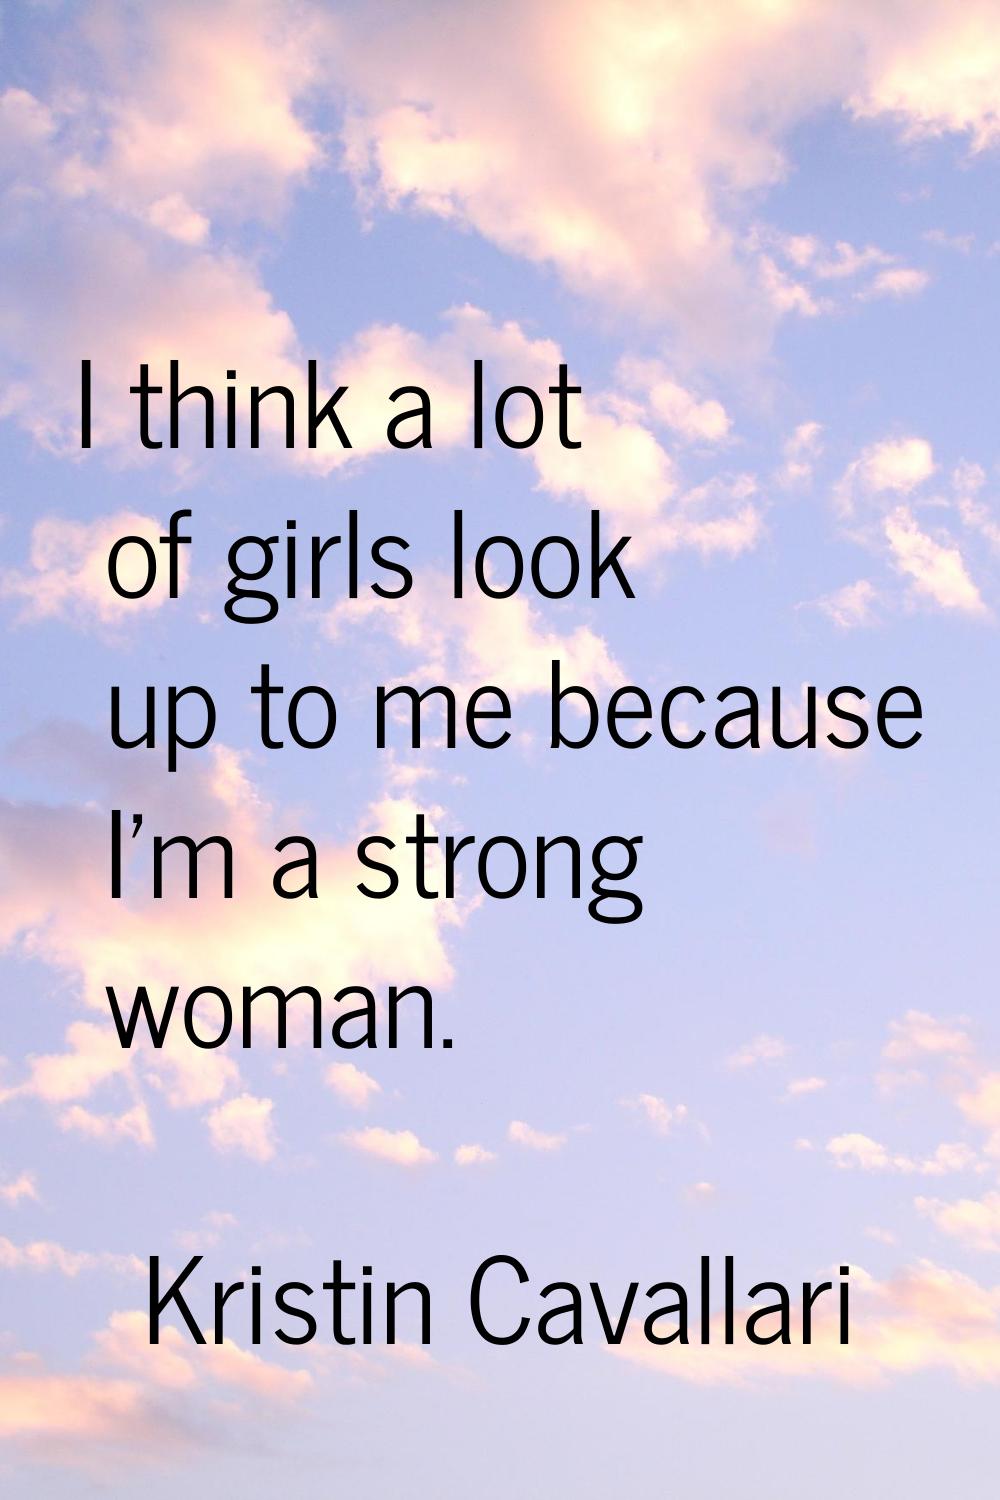 I think a lot of girls look up to me because I'm a strong woman.